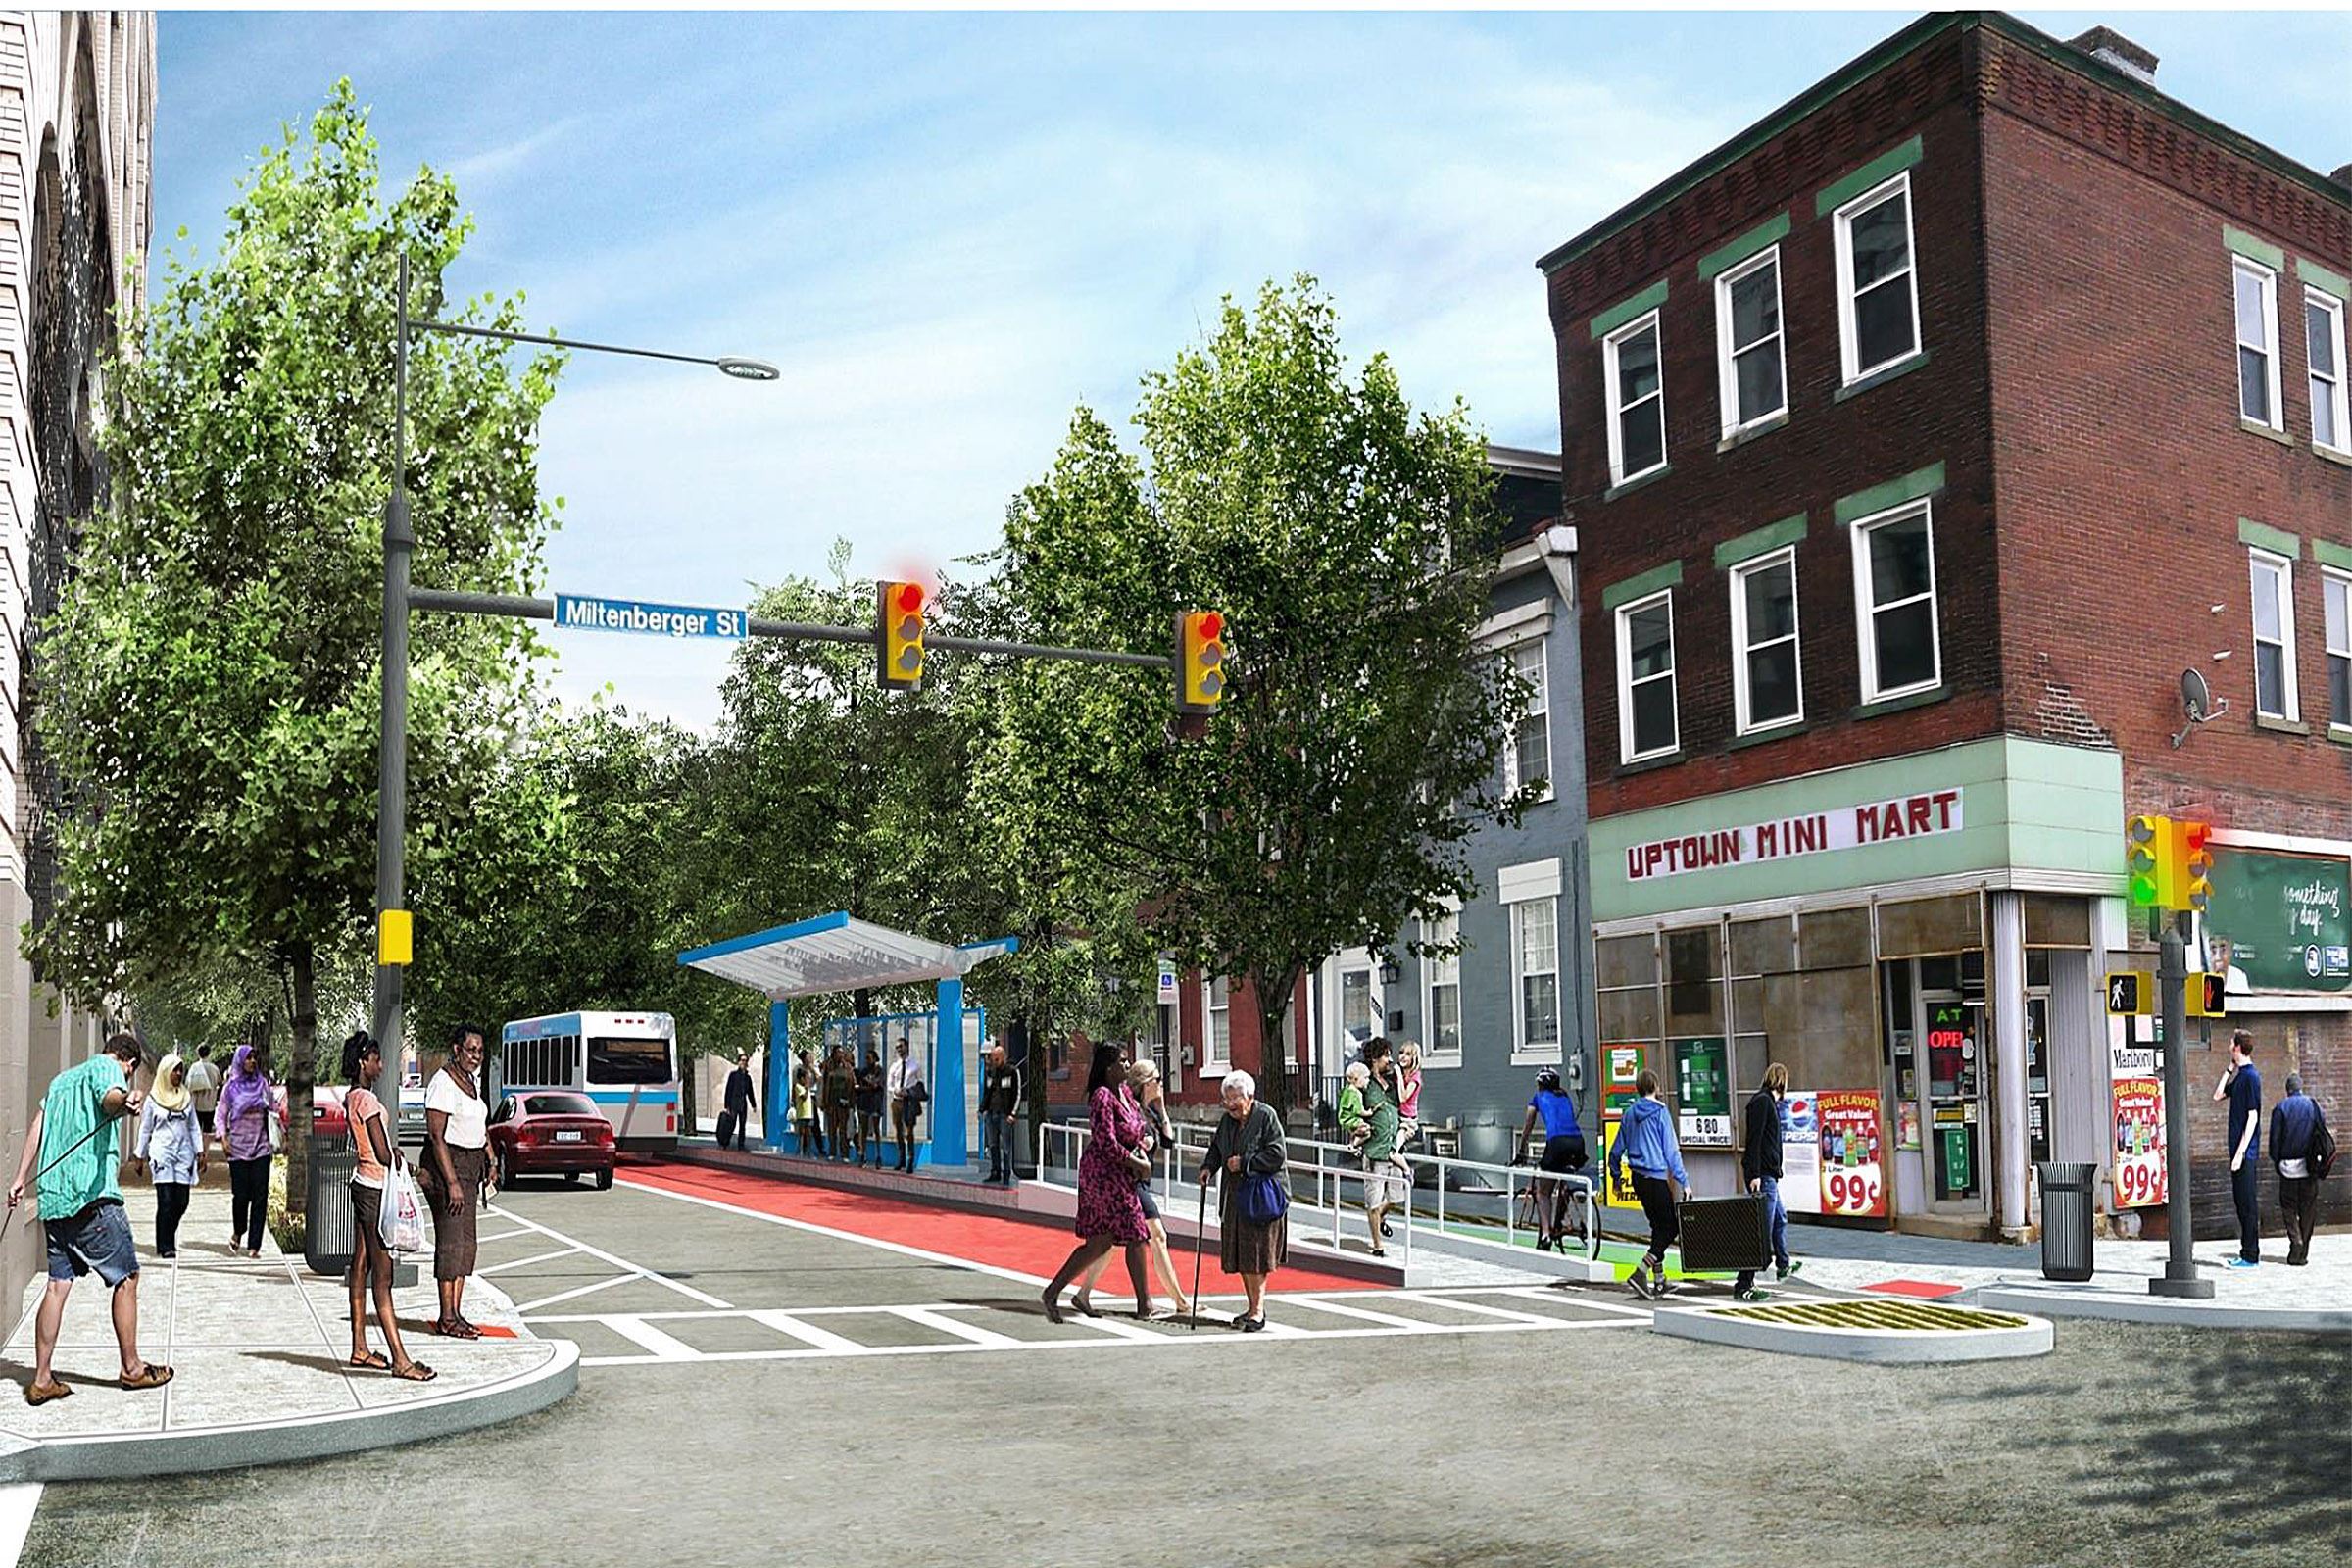 An artist's rendering showing how the planned Bus Rapid Transit system might run through Uptown.